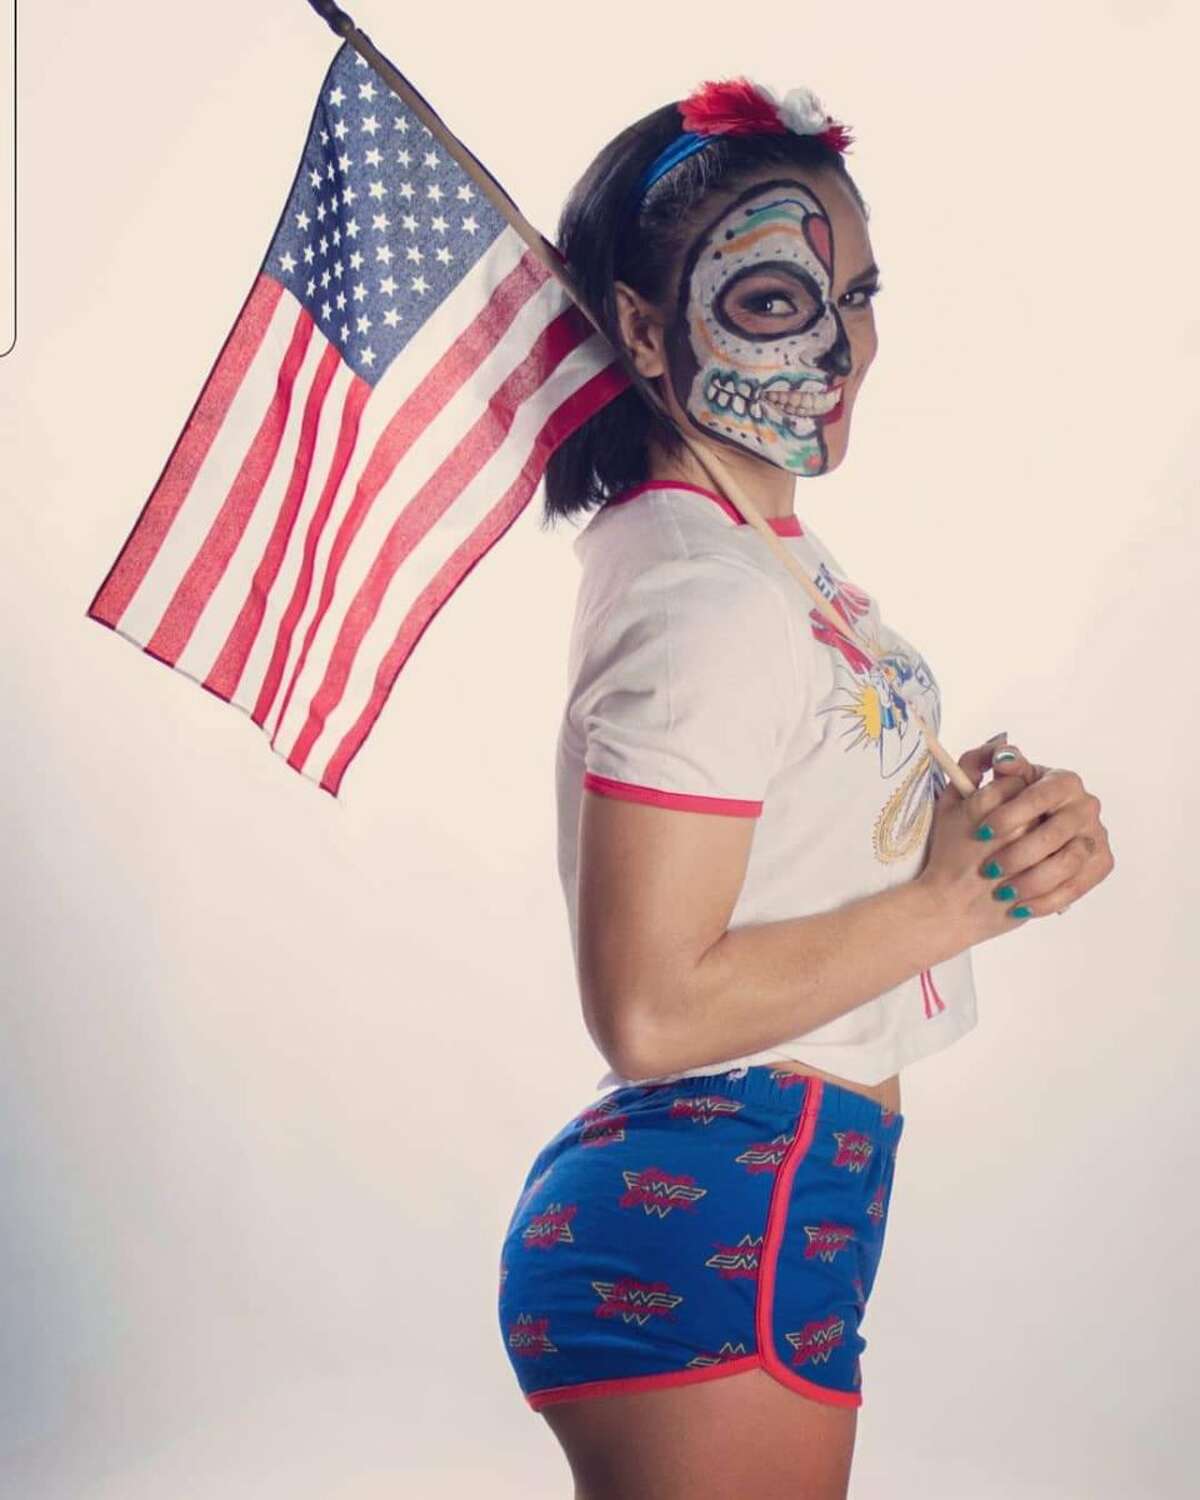 San Antonio pro wrestler Thunder Rosa shared on social media the excitement she has about becoming a United States citizen.